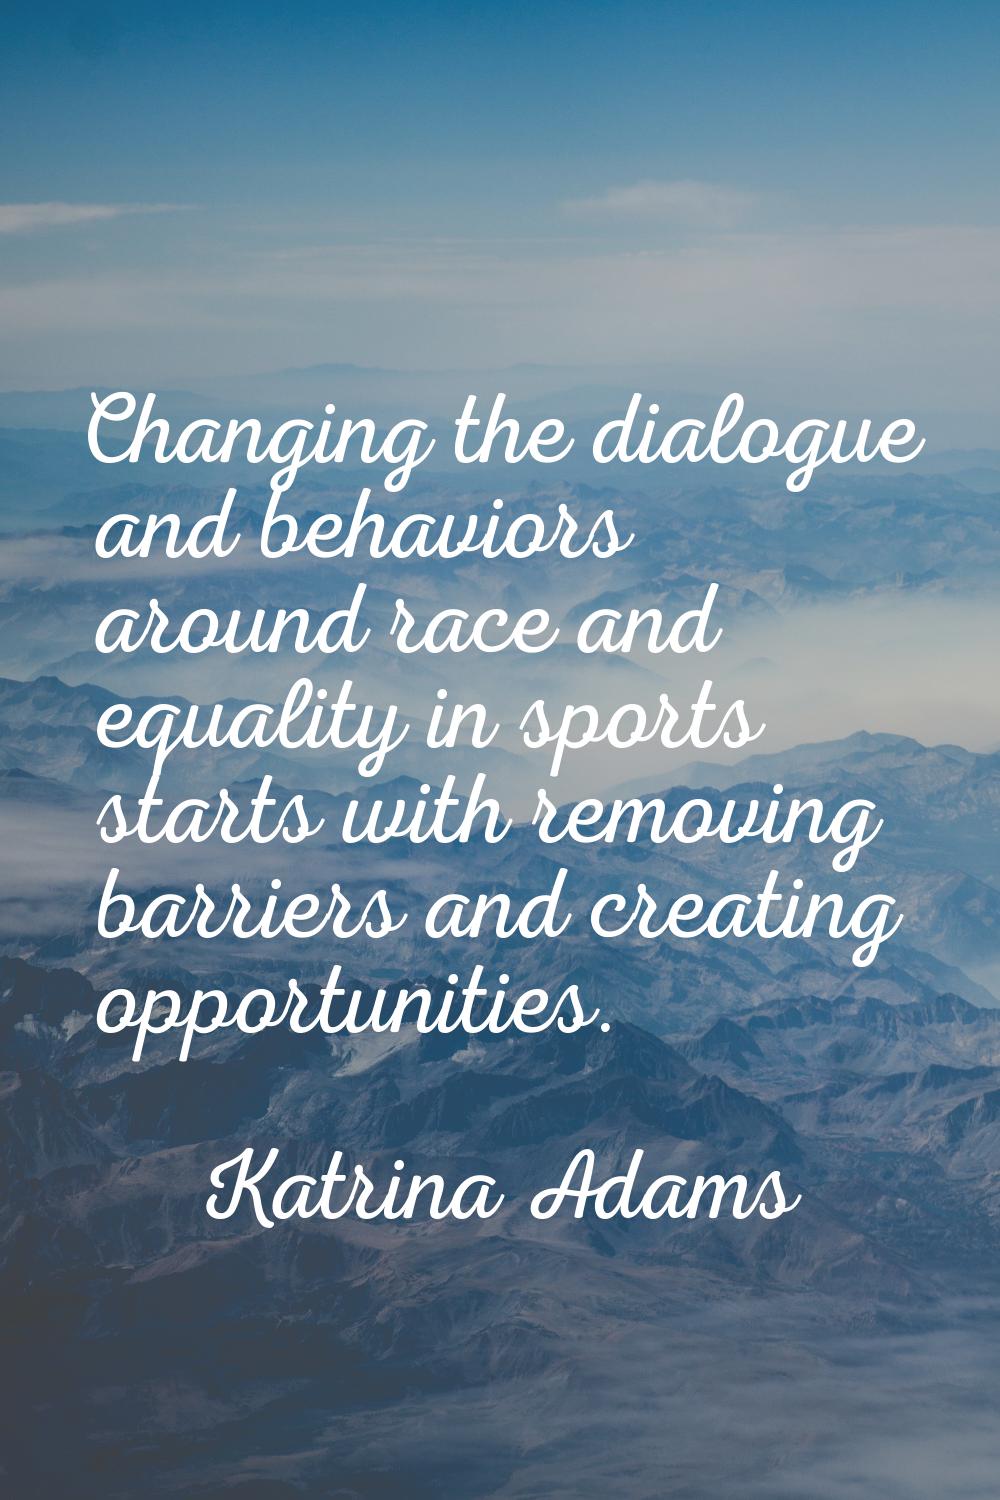 Changing the dialogue and behaviors around race and equality in sports starts with removing barrier